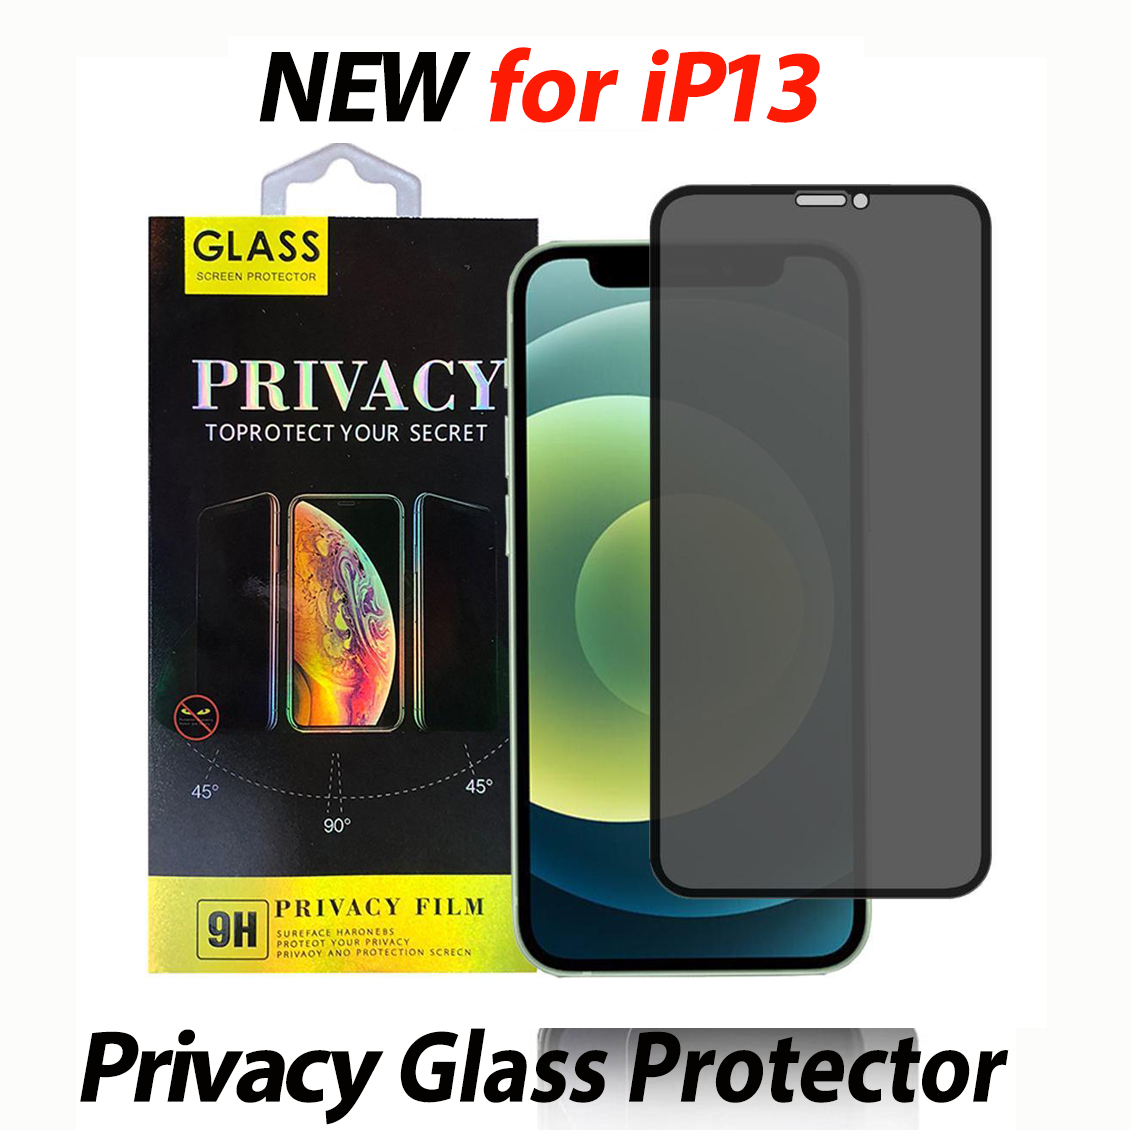 

Privacy Anti-peeping anti-spy Full Cover Tempered Glass screen protector Anti-glare For iPhone 13 12 11 Pro max XR XS SAMSUNG A72 A52 A42 A32 A22 A12 A02S 5G with retail box